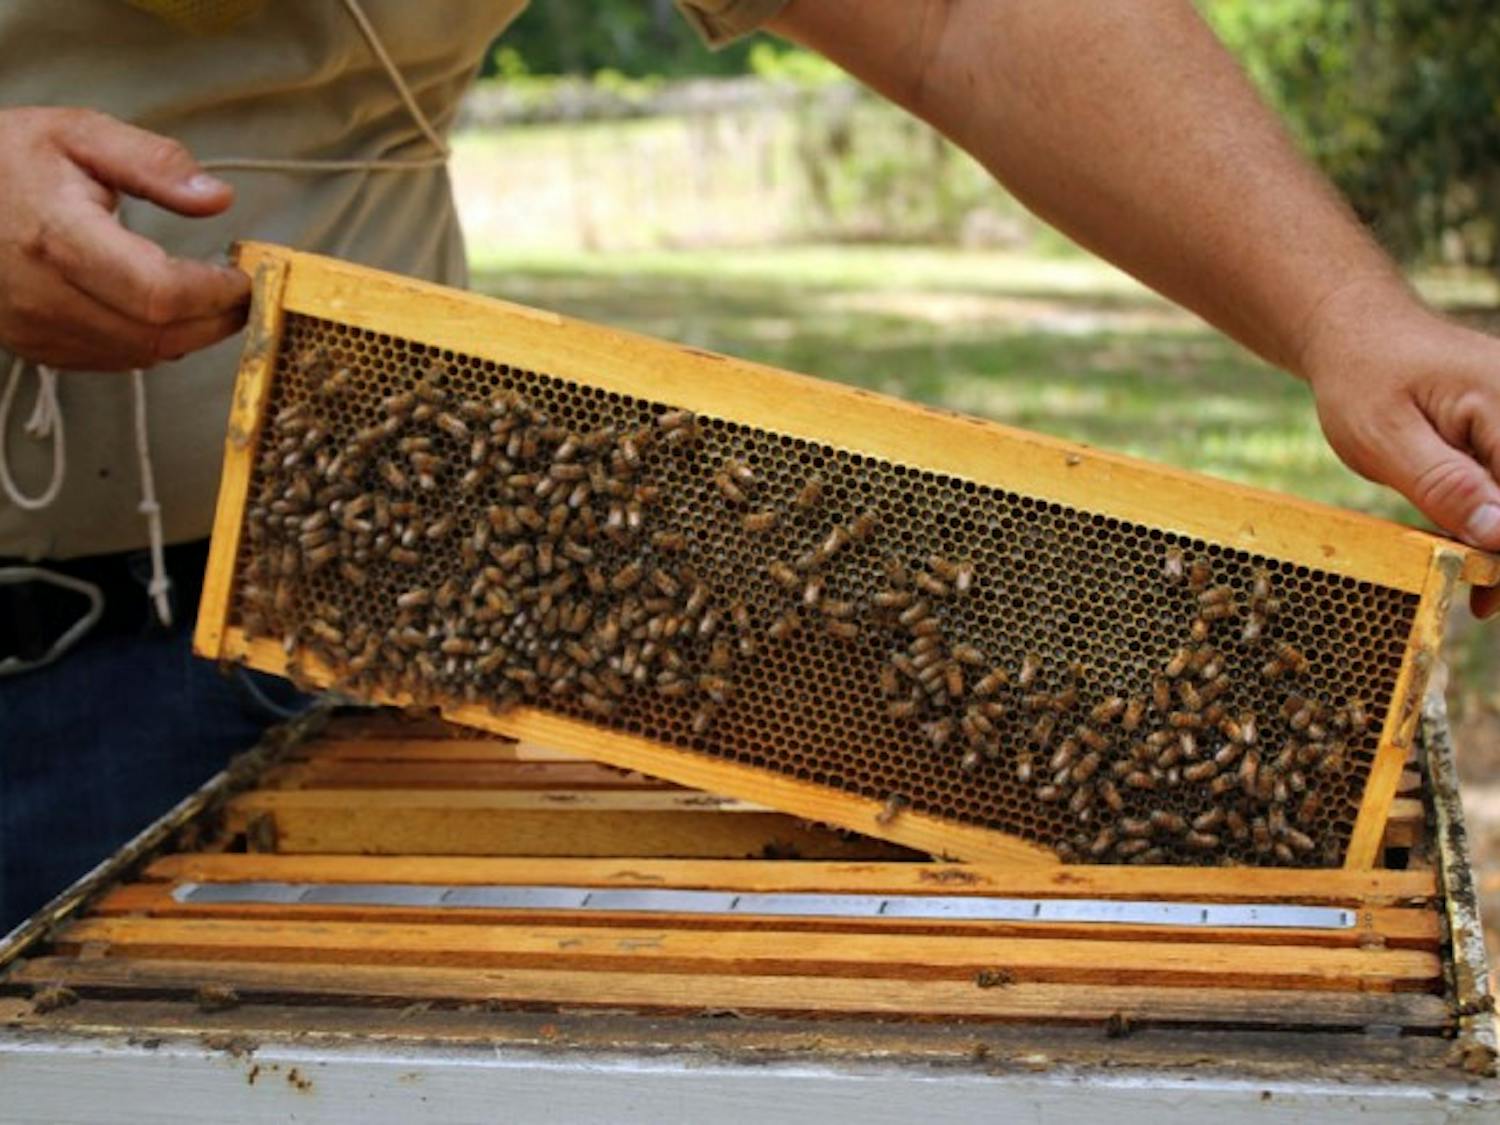 Research technician and apiary manager Mark Dykes lifts a tray from a hive at the UF Bee Biology Research Unit.